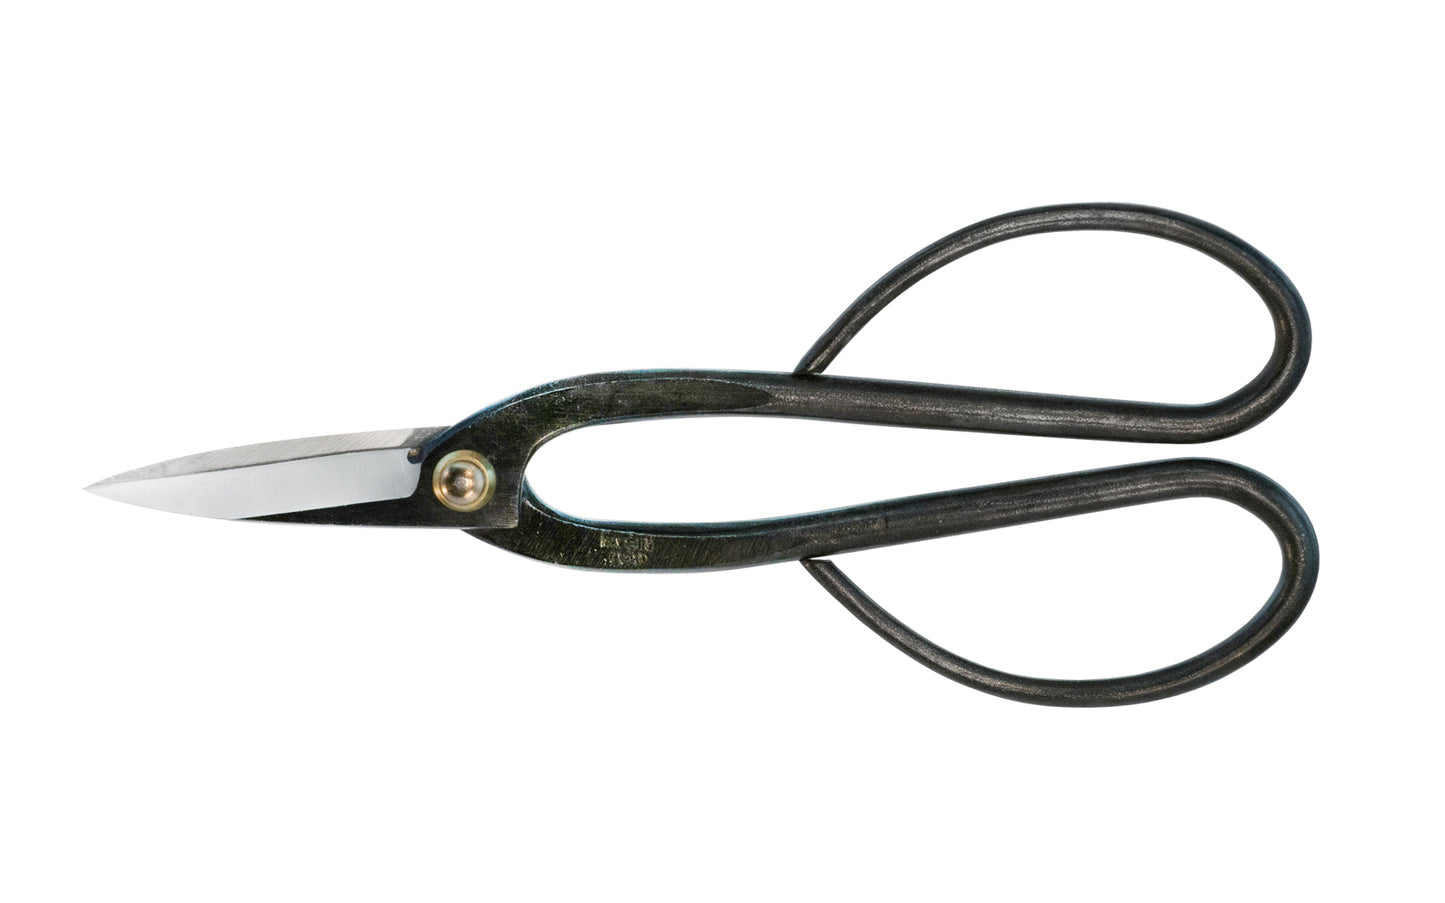 These Japanese Ashinaga Basami Shears are high quality snips for Bonsai, bud cutting, floral thinning, & other multi-purpose outdoor garden work. Made of high carbon steel, the cutting edges are sharp & cut nicely. Large handles for a good grip. Works excellent for thinning & defoliating Bonsai. Made in Japan.